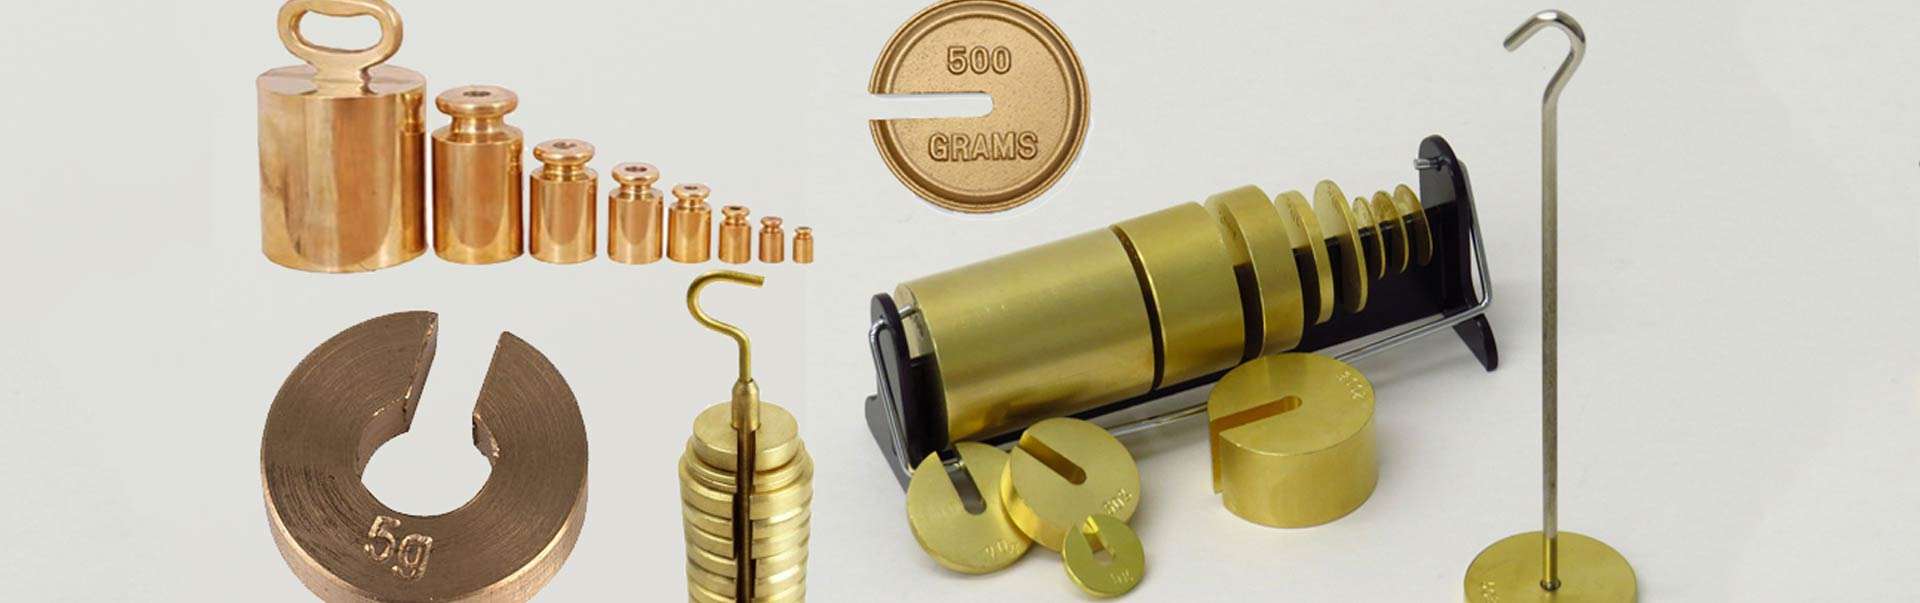 Test Weights Manufacturers in ghaziabad